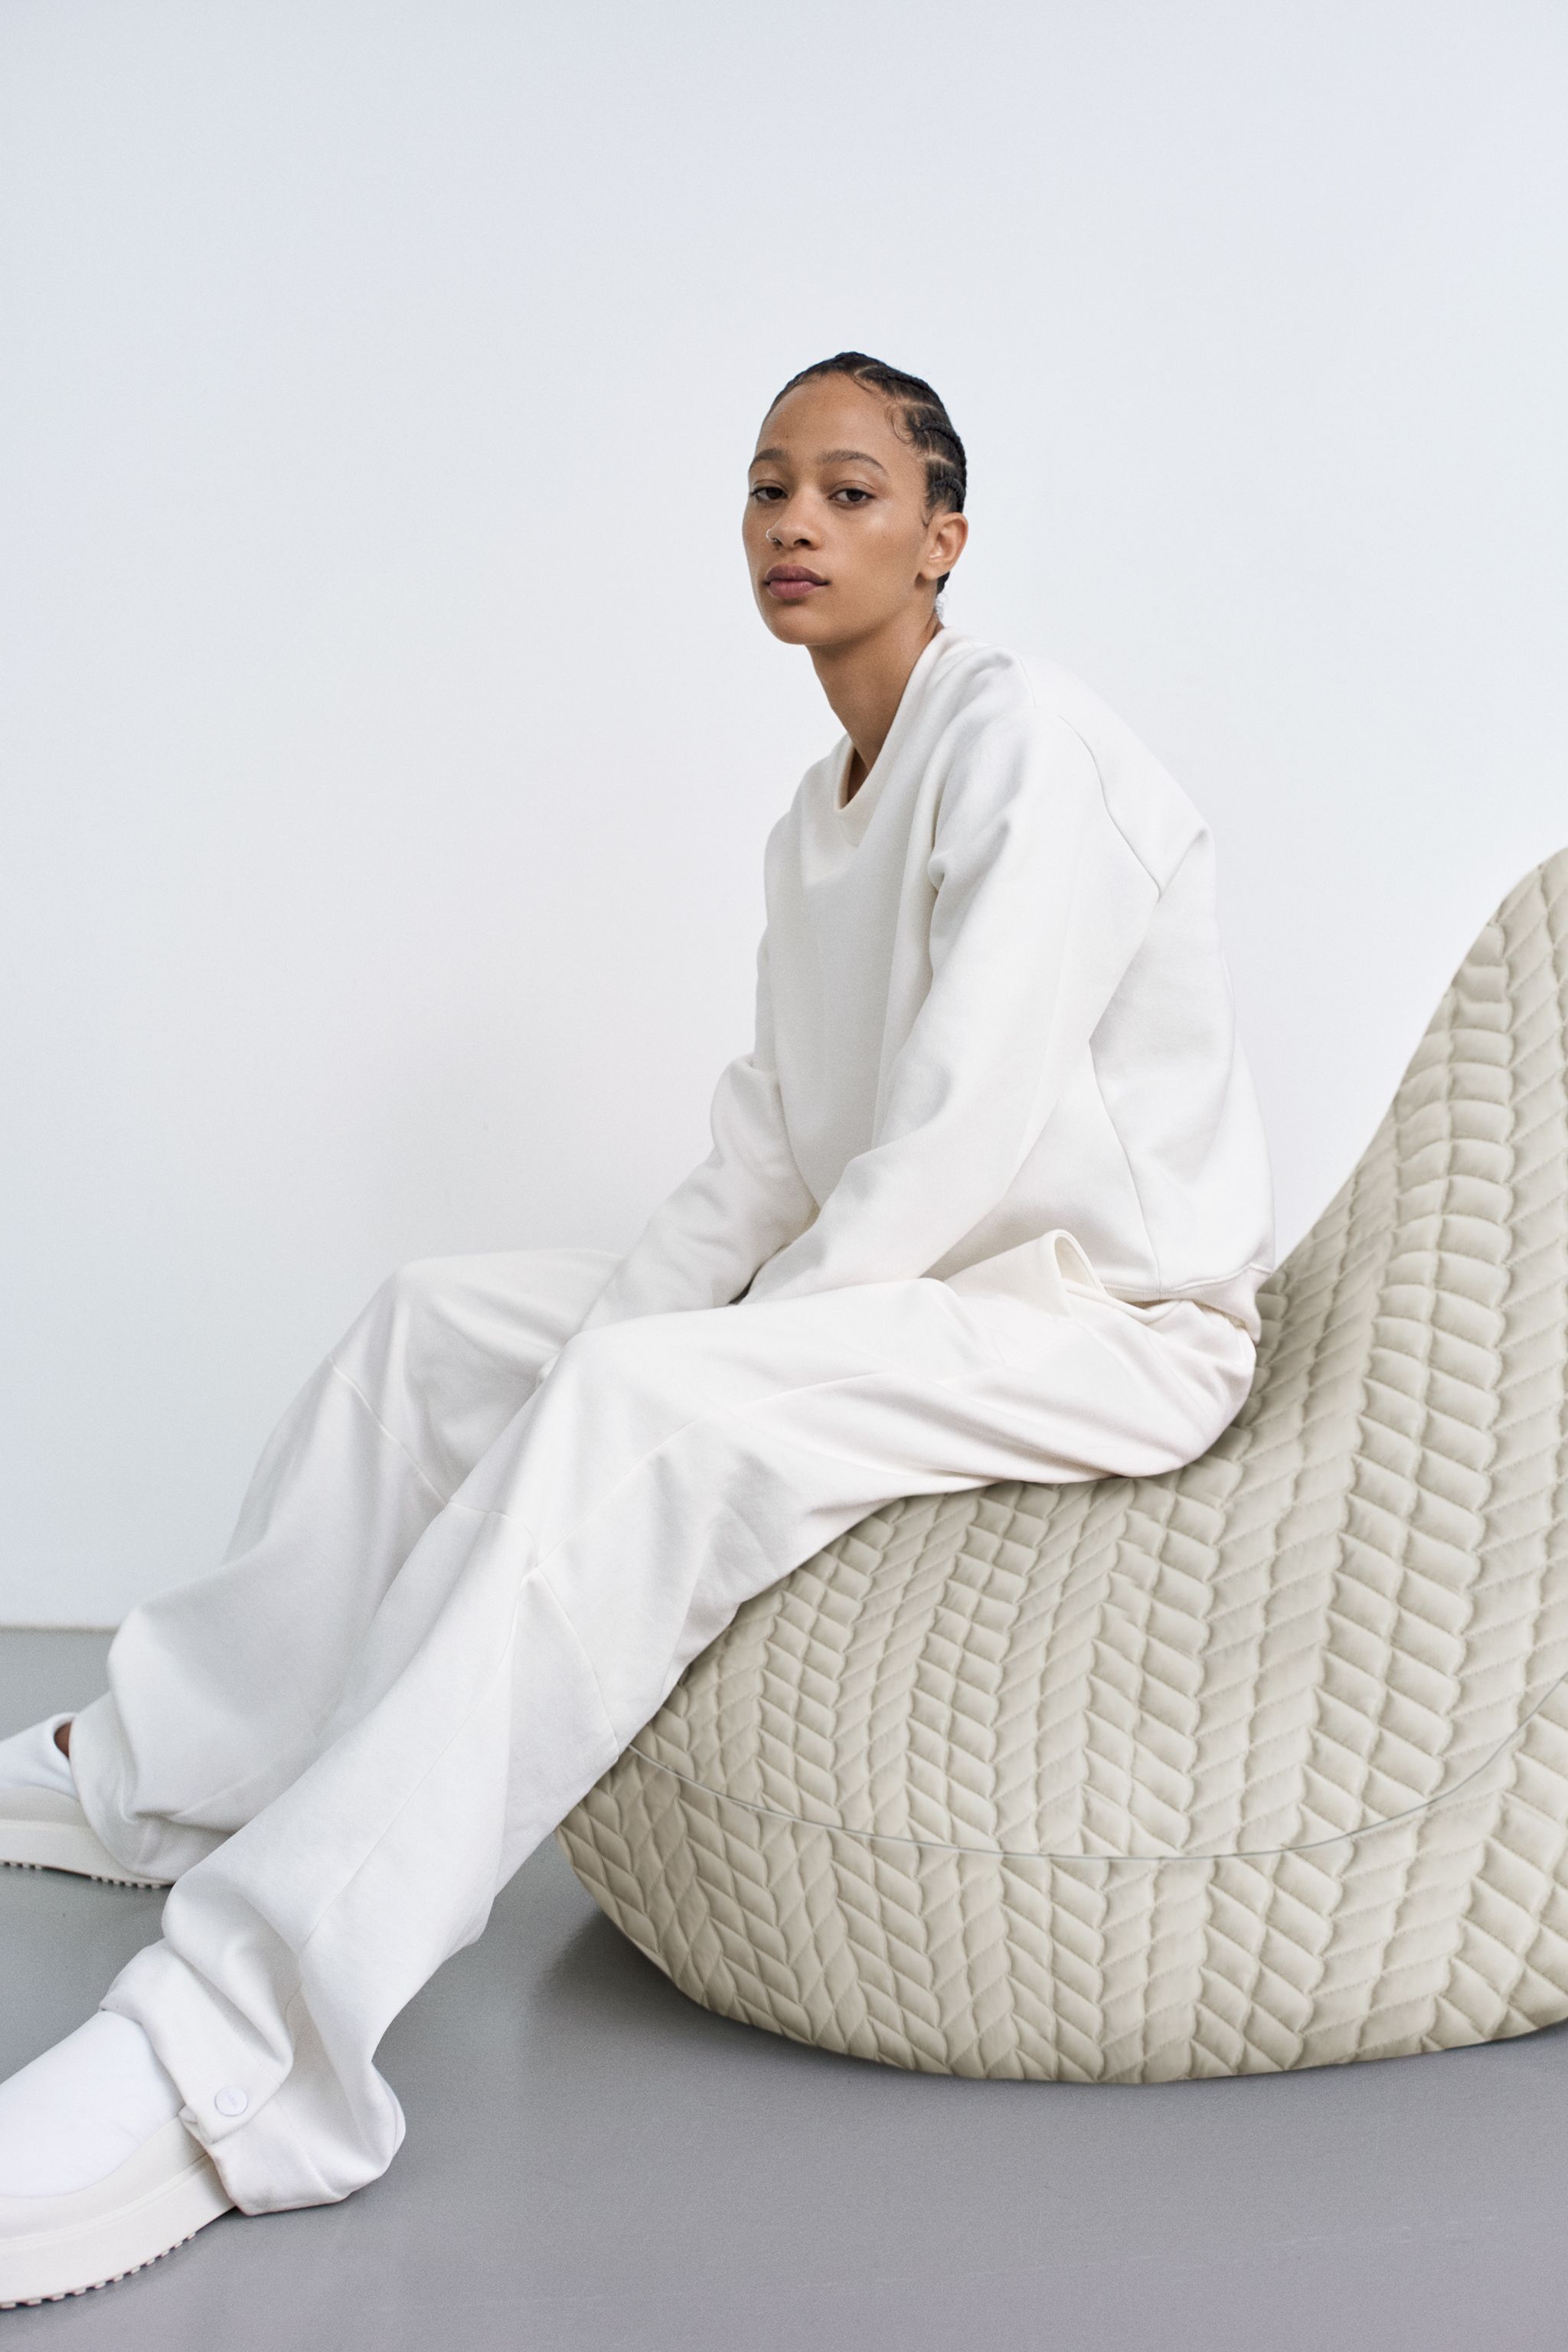 Zara Collaborates With KASSL Editions on a Capsule Collection